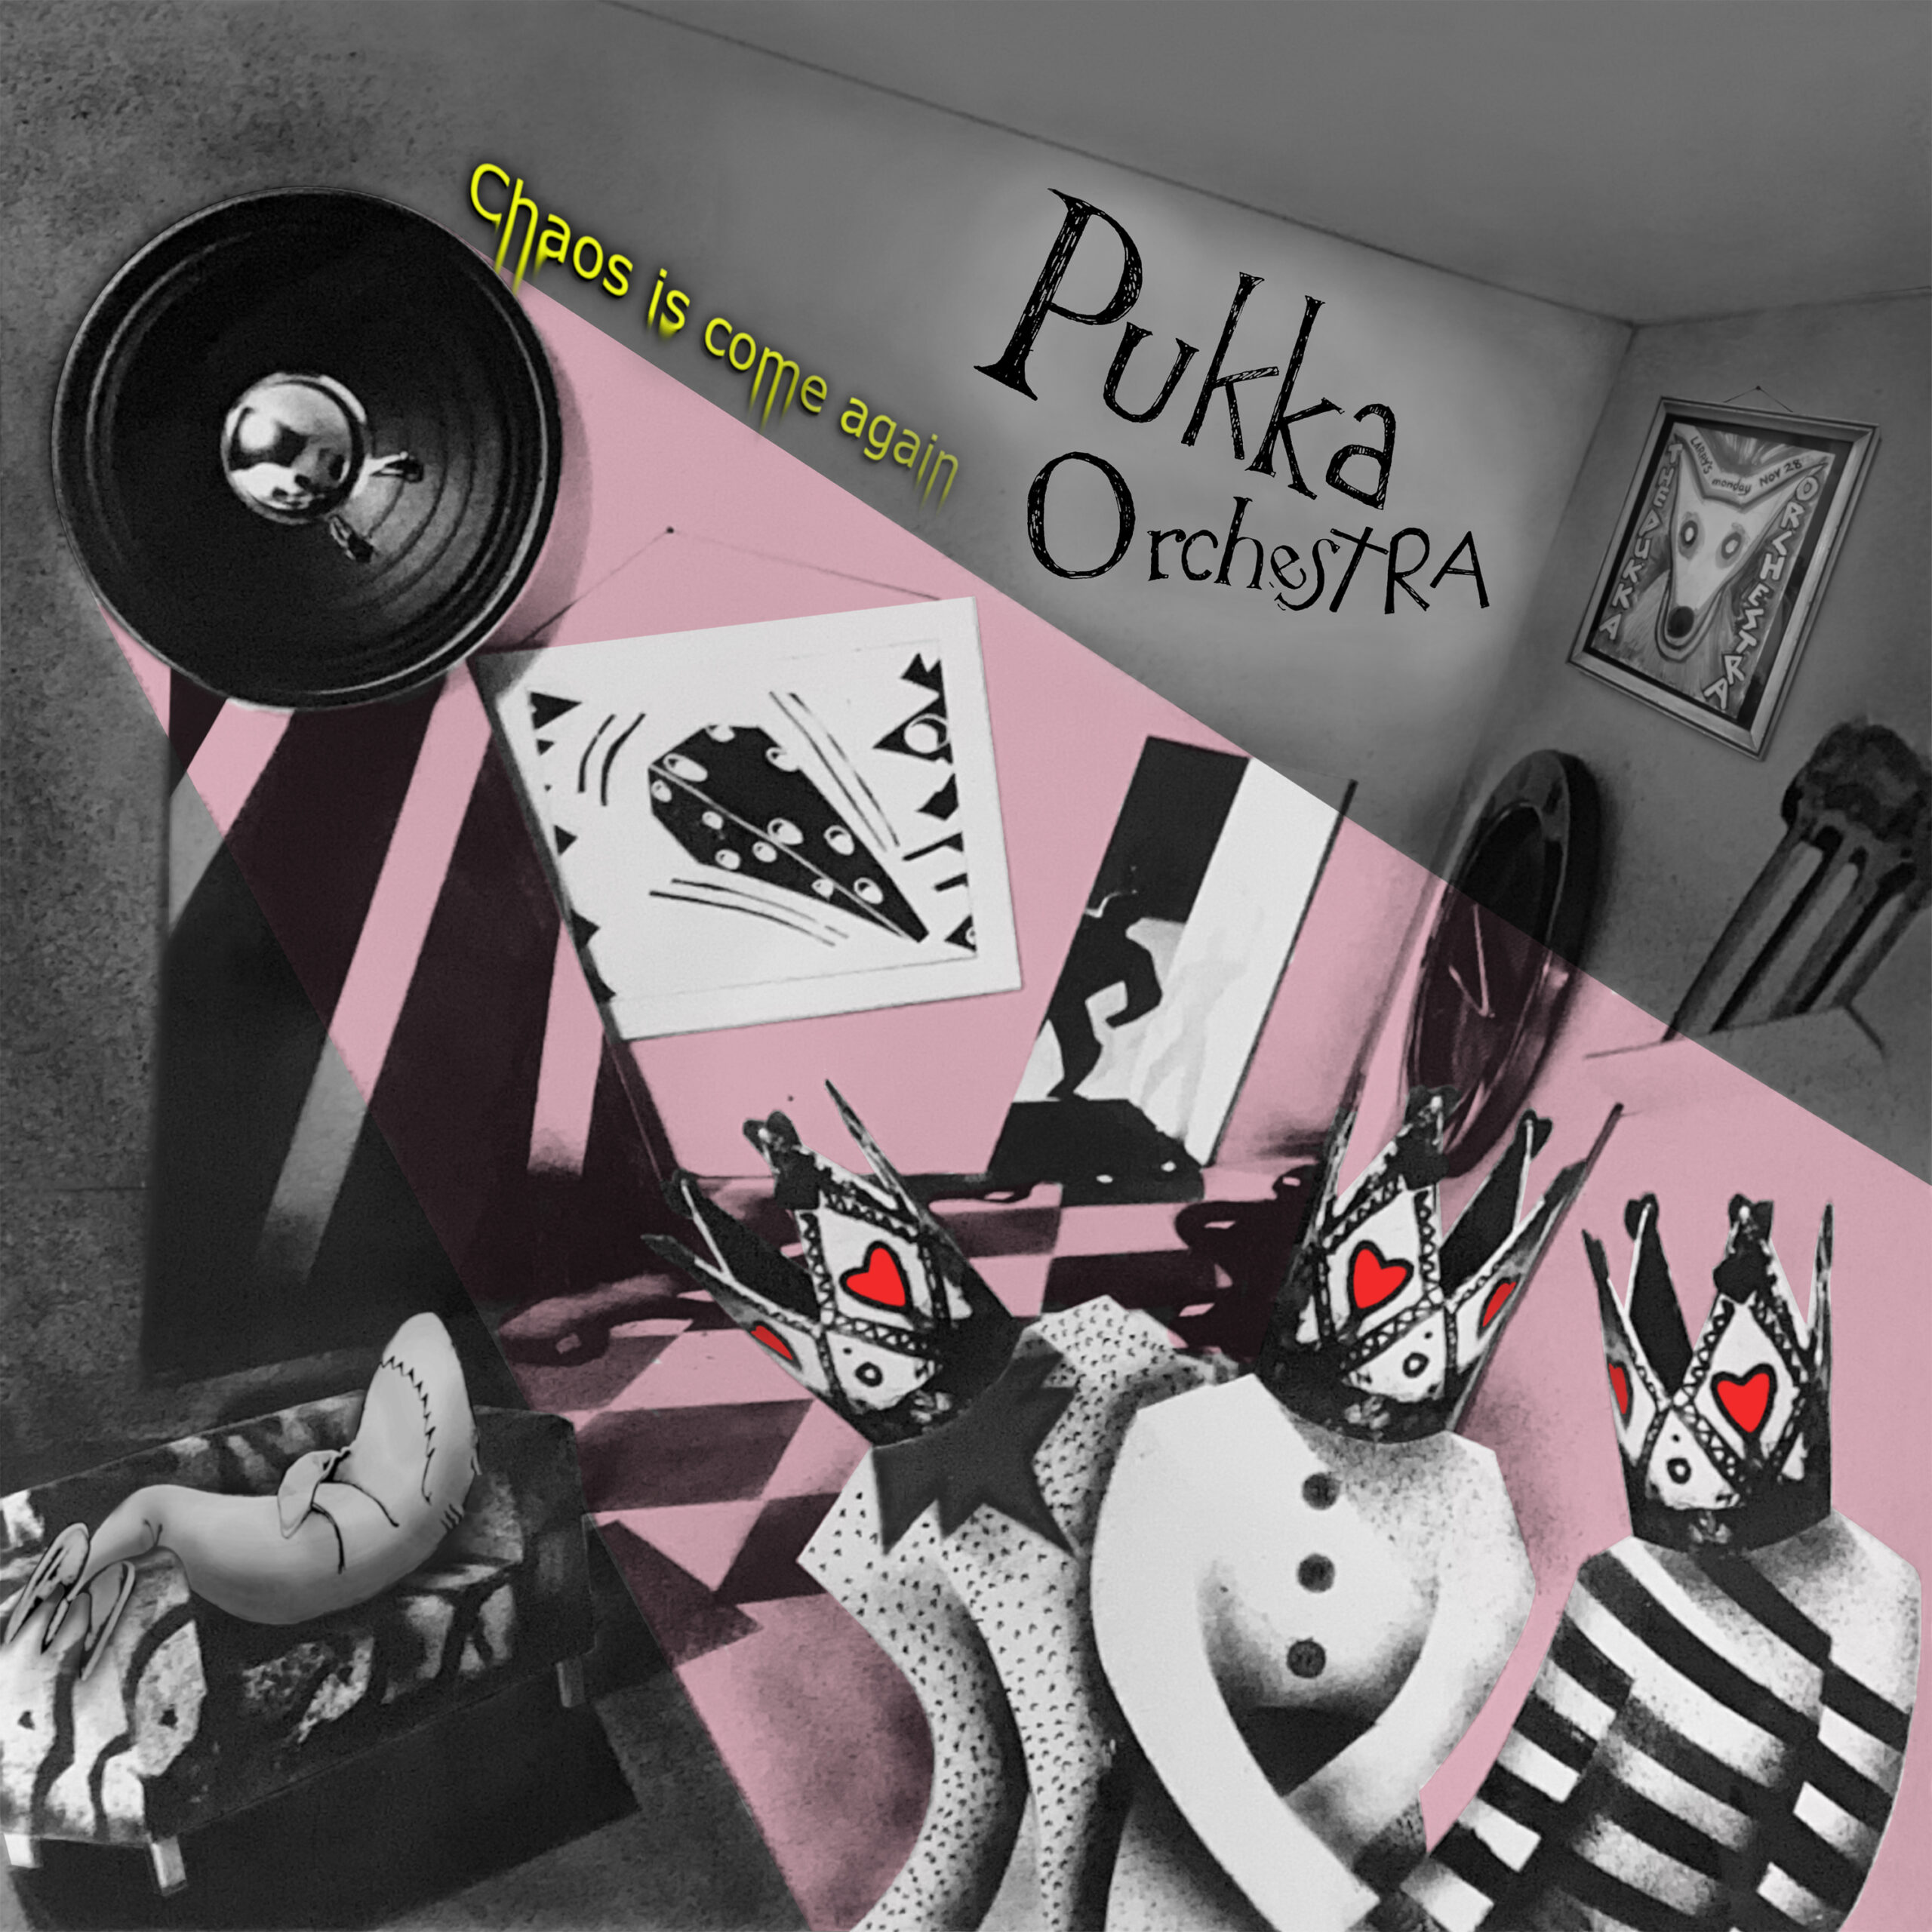 You are currently viewing The Pukka Orchestra – Chaos Is Come Again (Coming Soon)